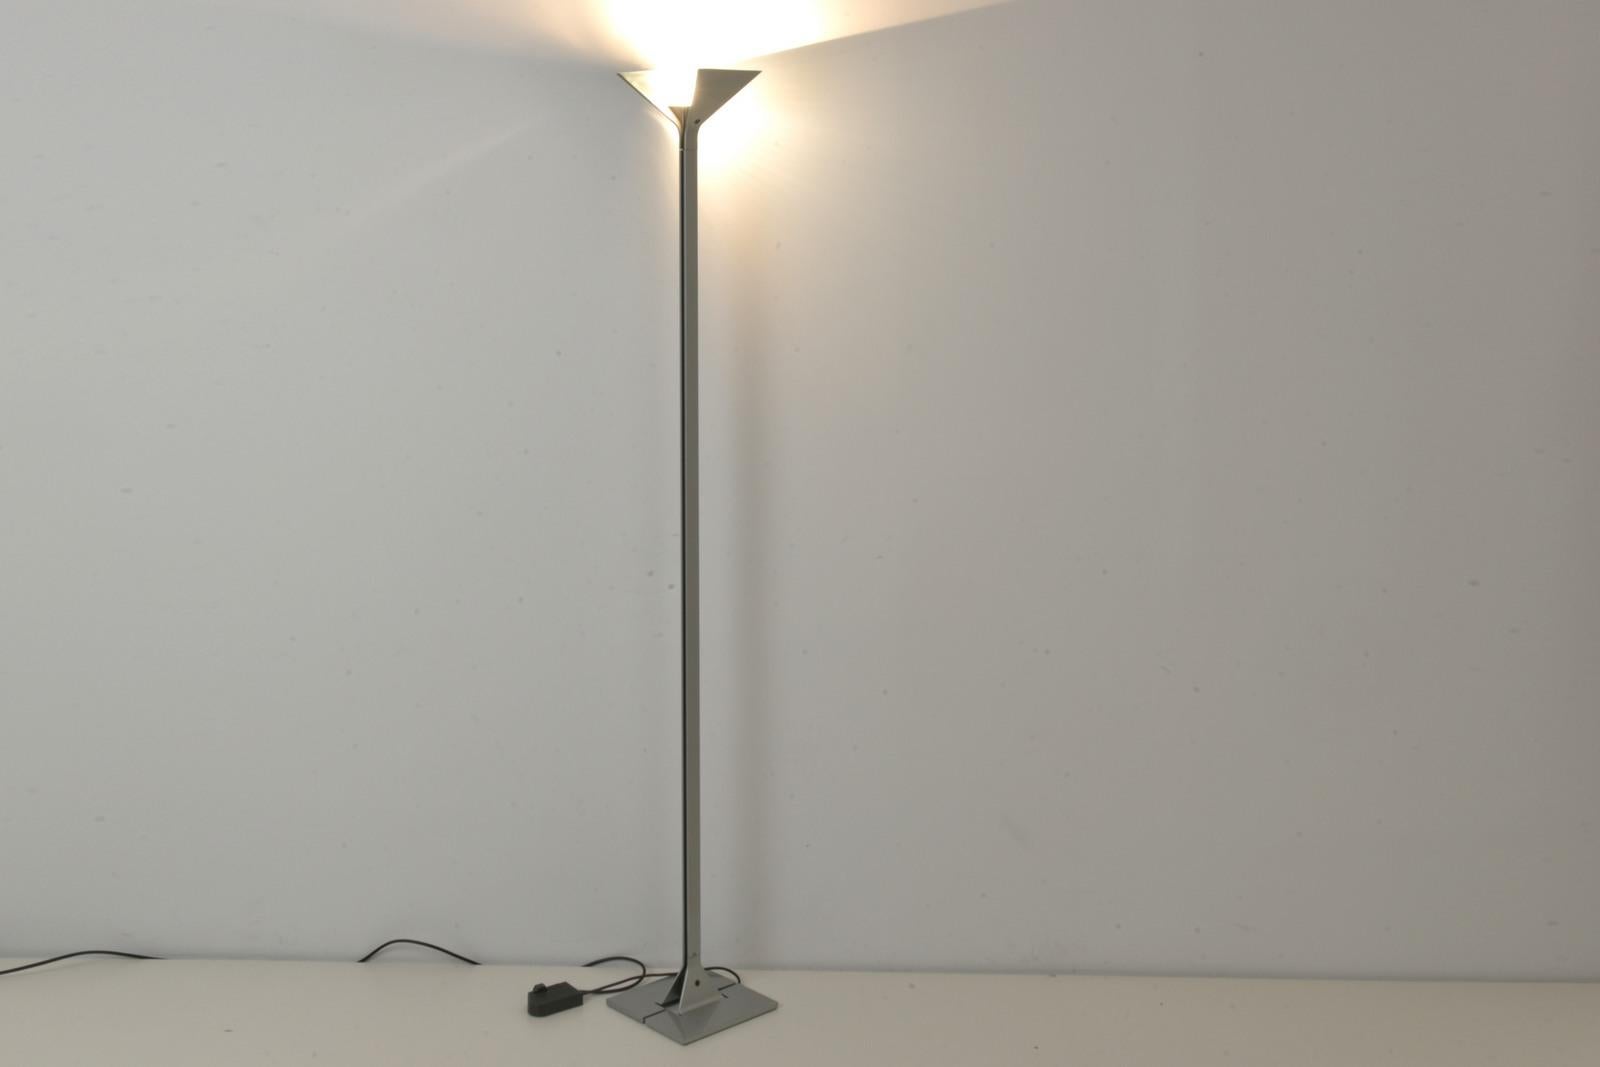 Italian PAPILLONA Floor Lamp by Tobia Scarpa for Flos, Italy - 1975 For Sale